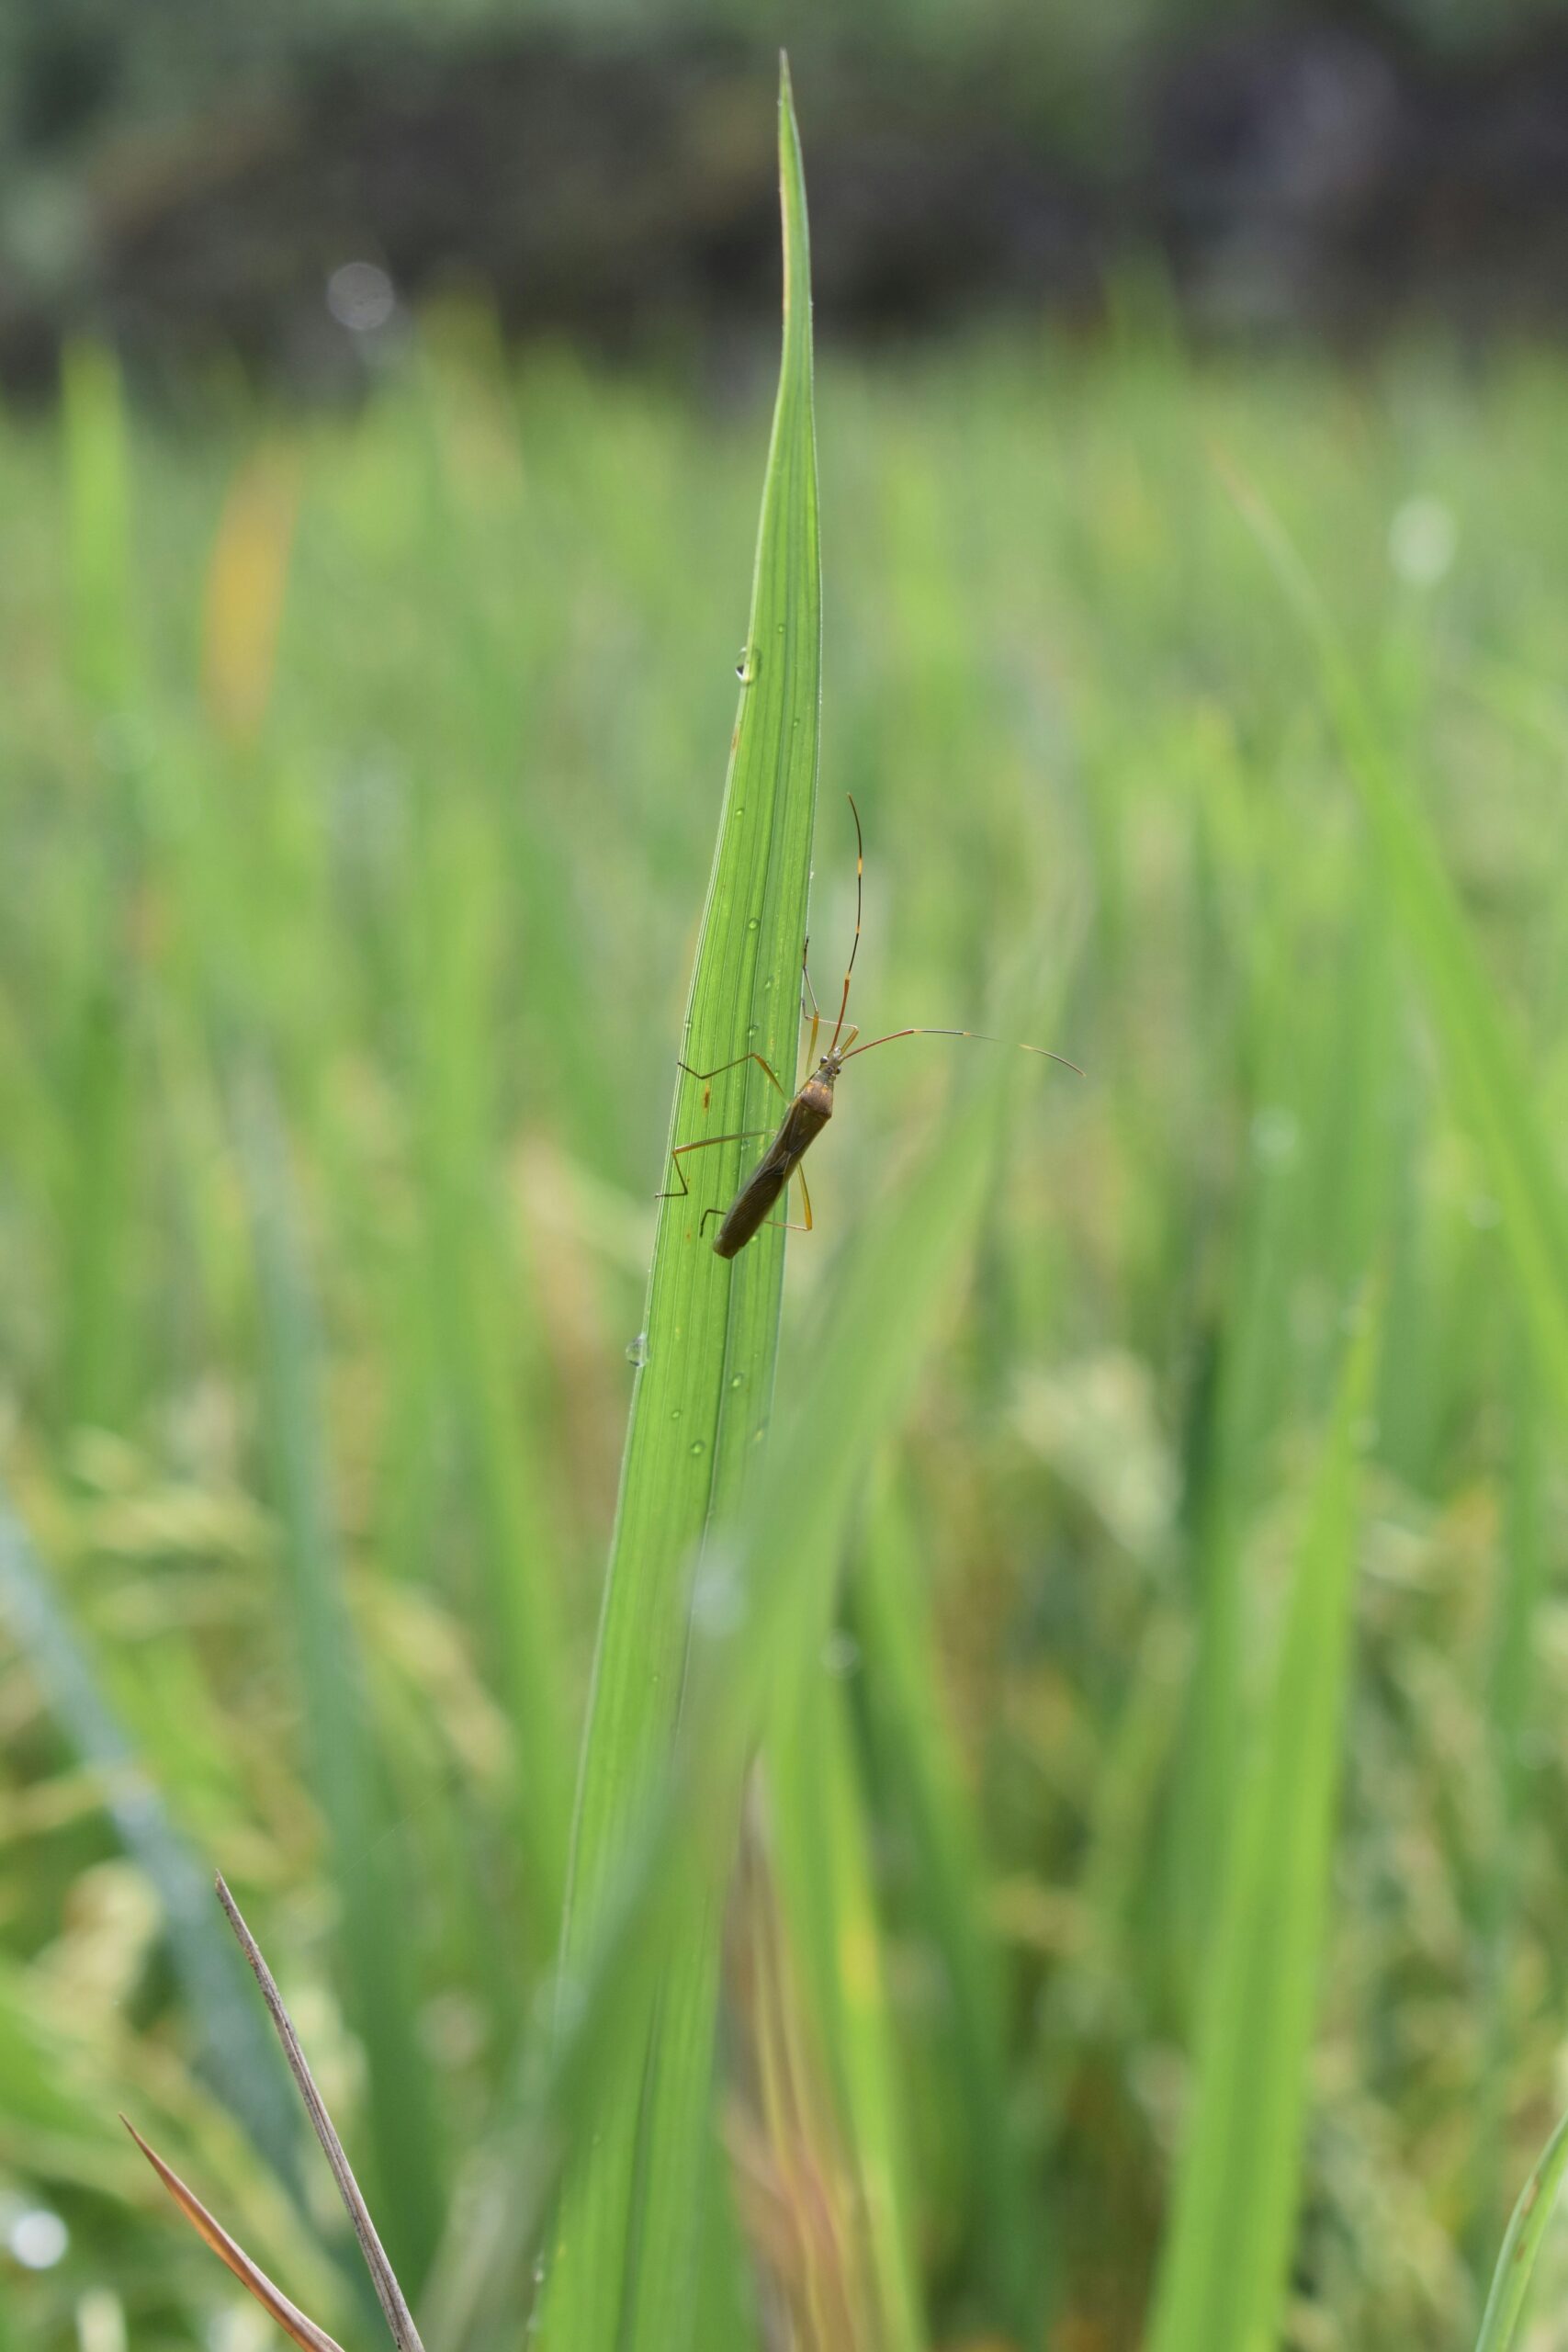 a bug is sitting on a blade of grass